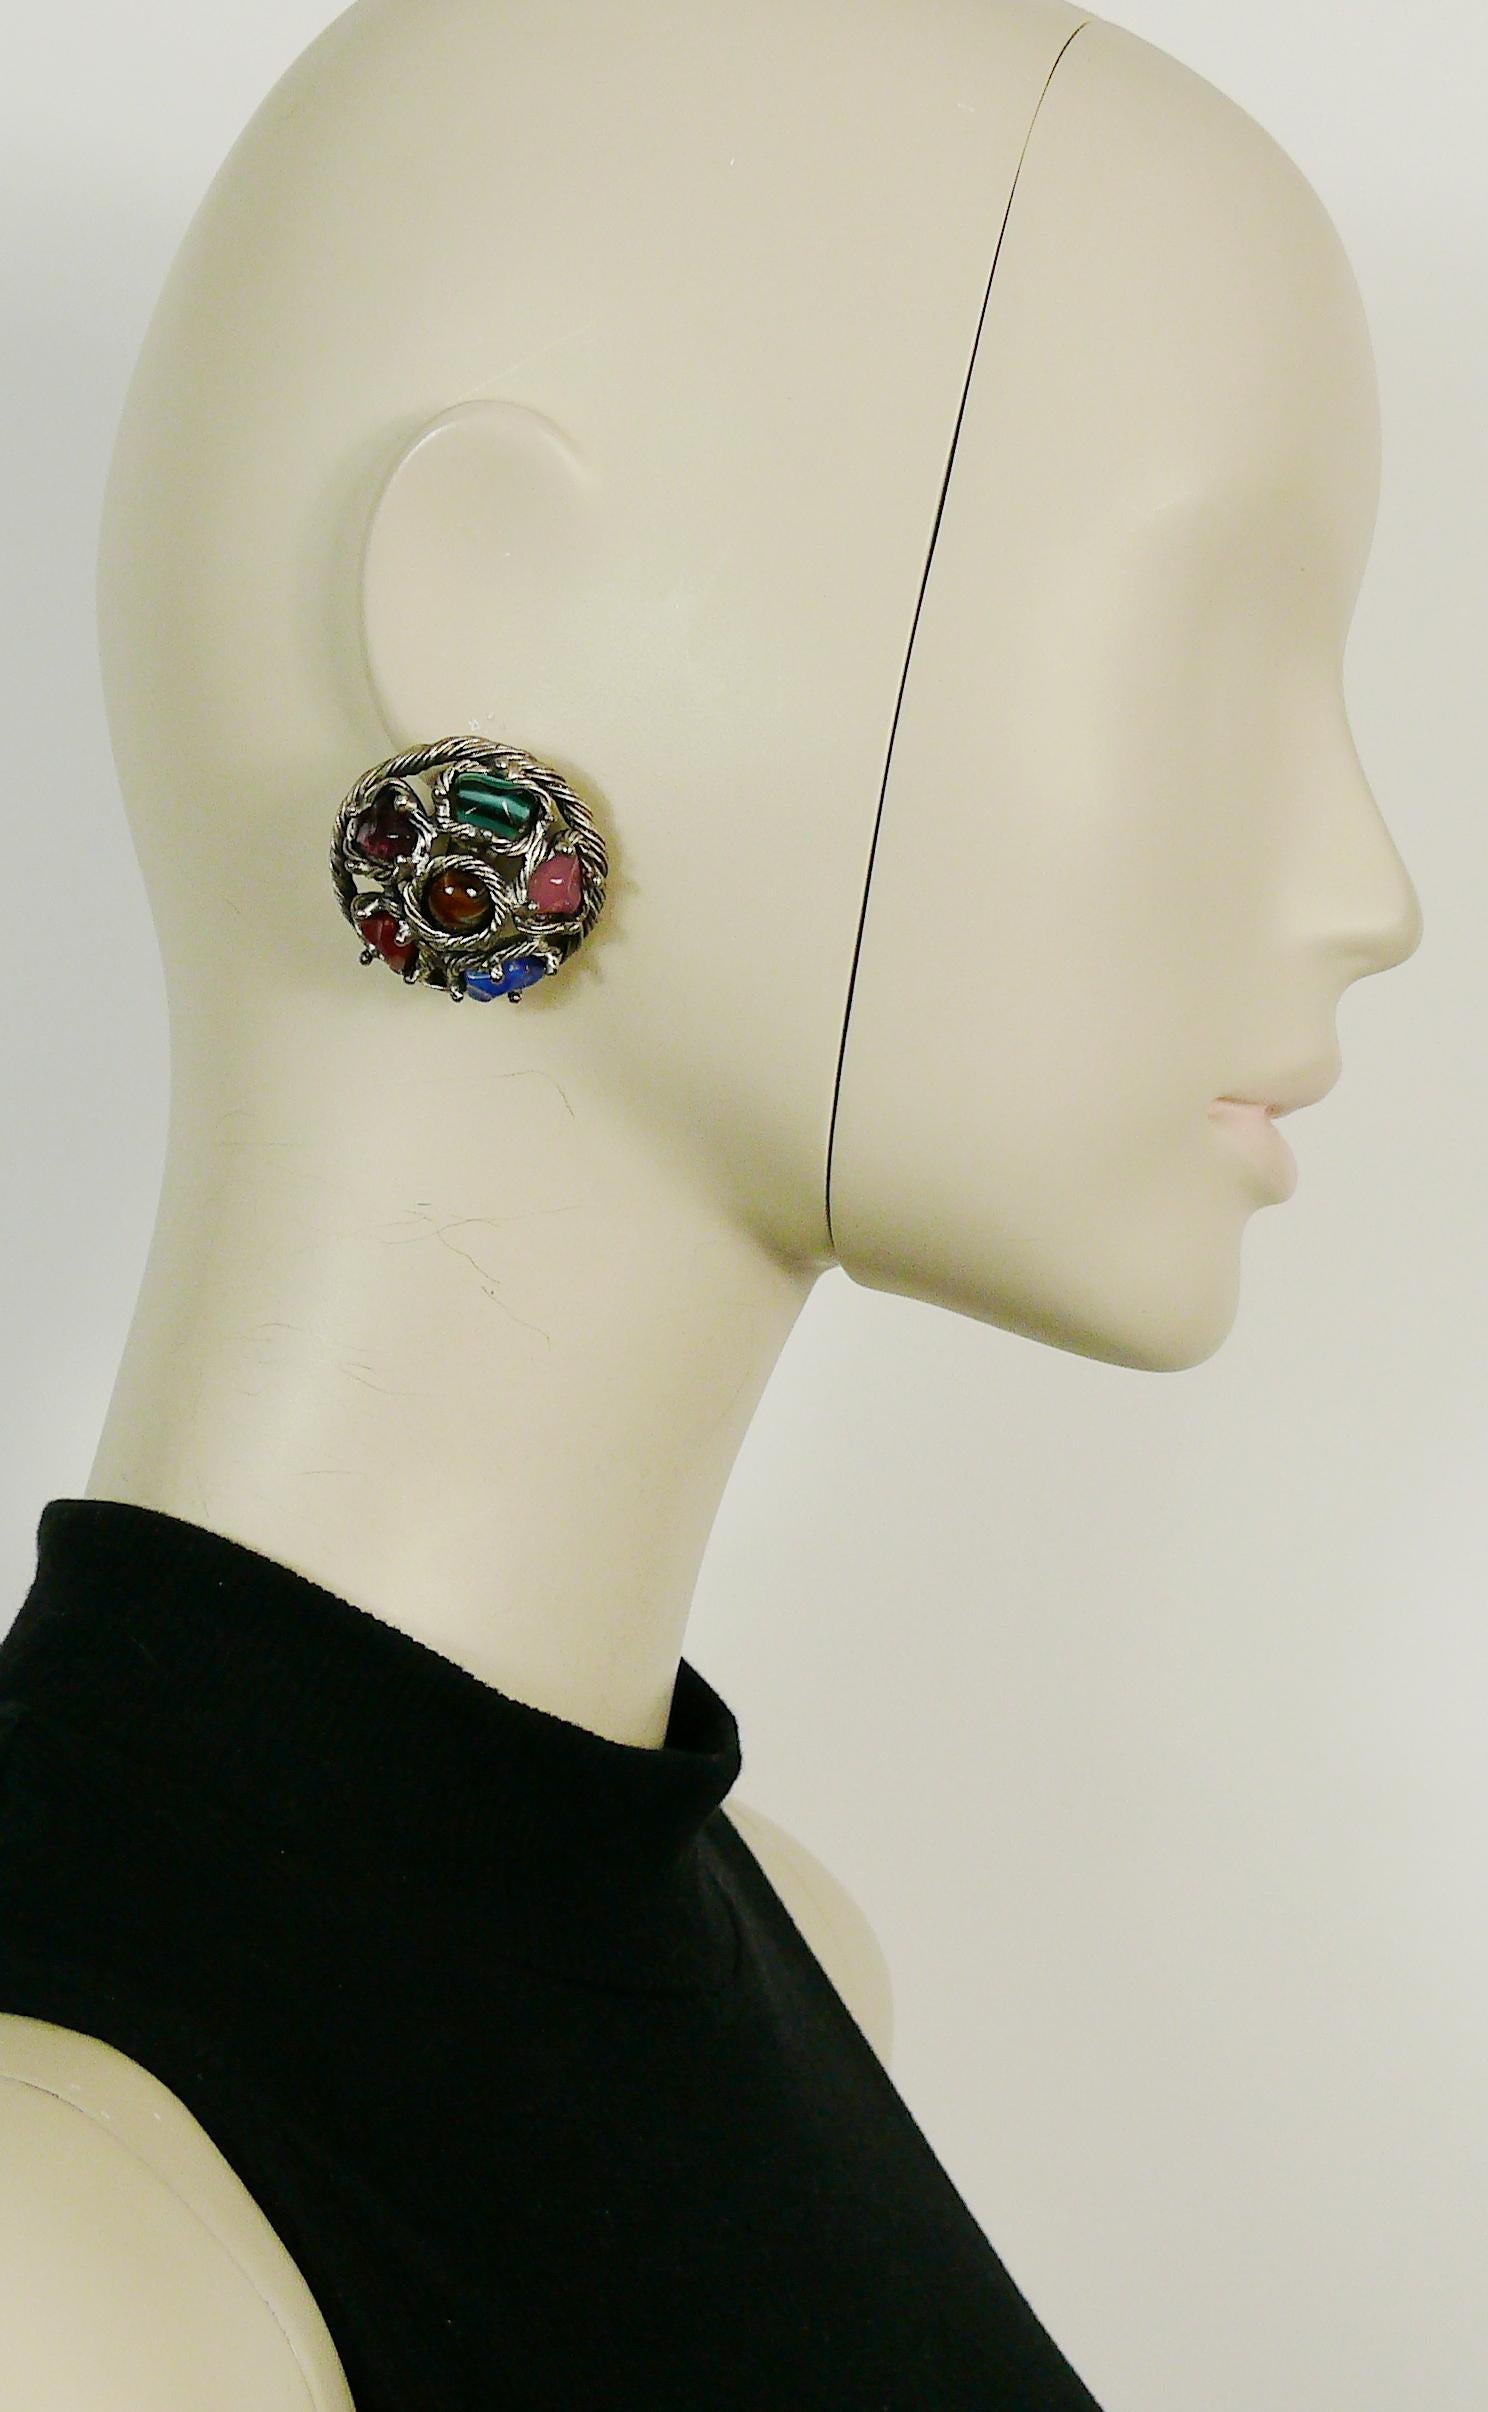 CHRISTIAN DIOR vintage antiqued silver toned rope design domed clip-on earrings embellished with multicolored glass cabochons simulating hard stones.

Embossed CHR. DIOR Germany.

Indicative measurements : diameter approx. 3.6 cm (1.42